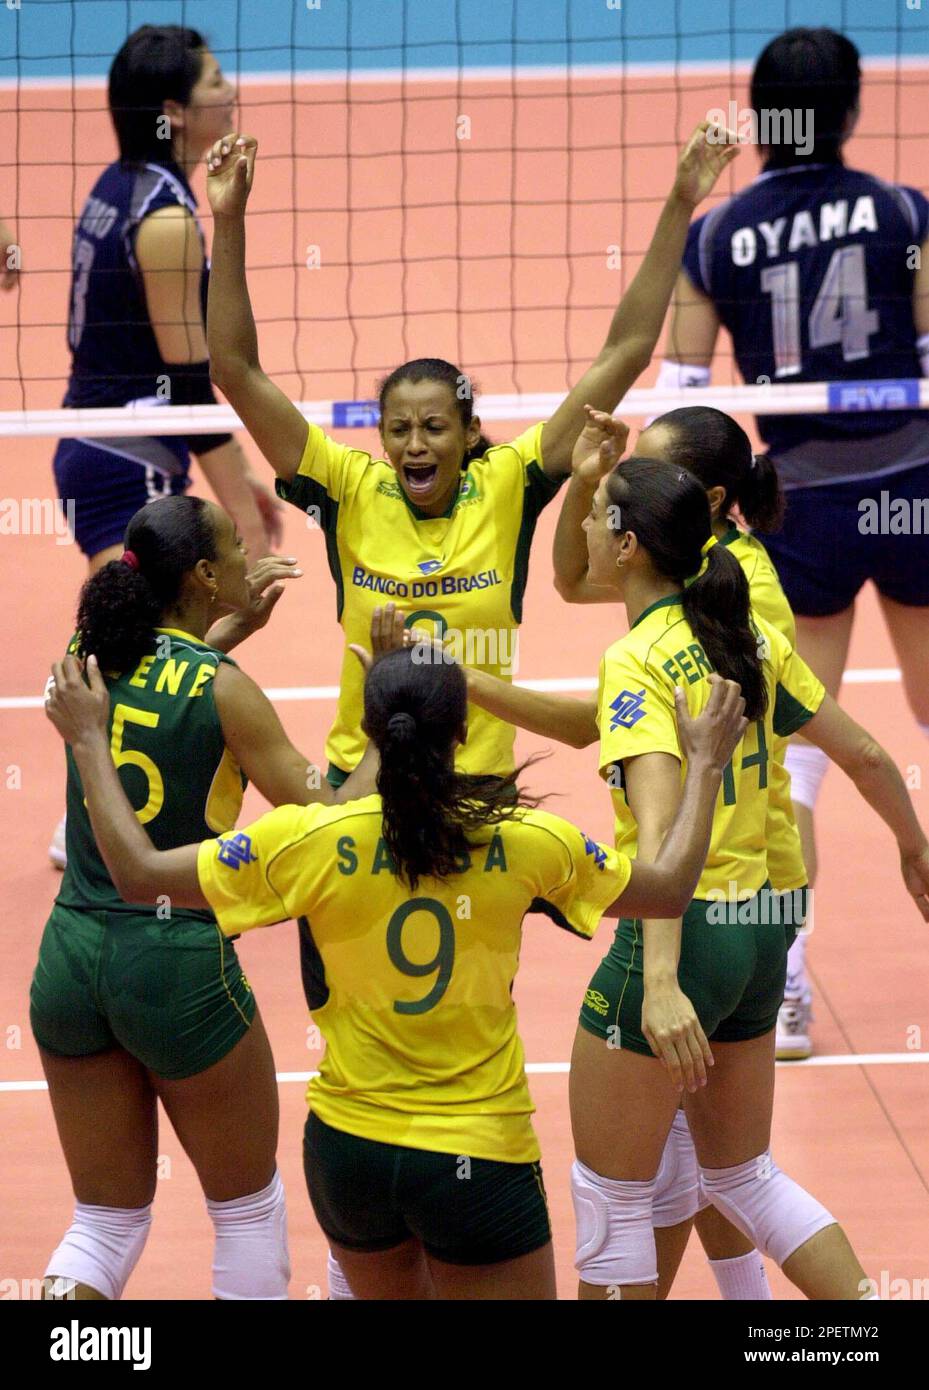 Brazil's Menezes Valeska, center, celebrates with her teammates after  scoring against Japan during the Women's World volleyball Grand Prix on  Jeju island, South Korea, Thursday, July 22. 2004. Brazil defeated Japan  25-13